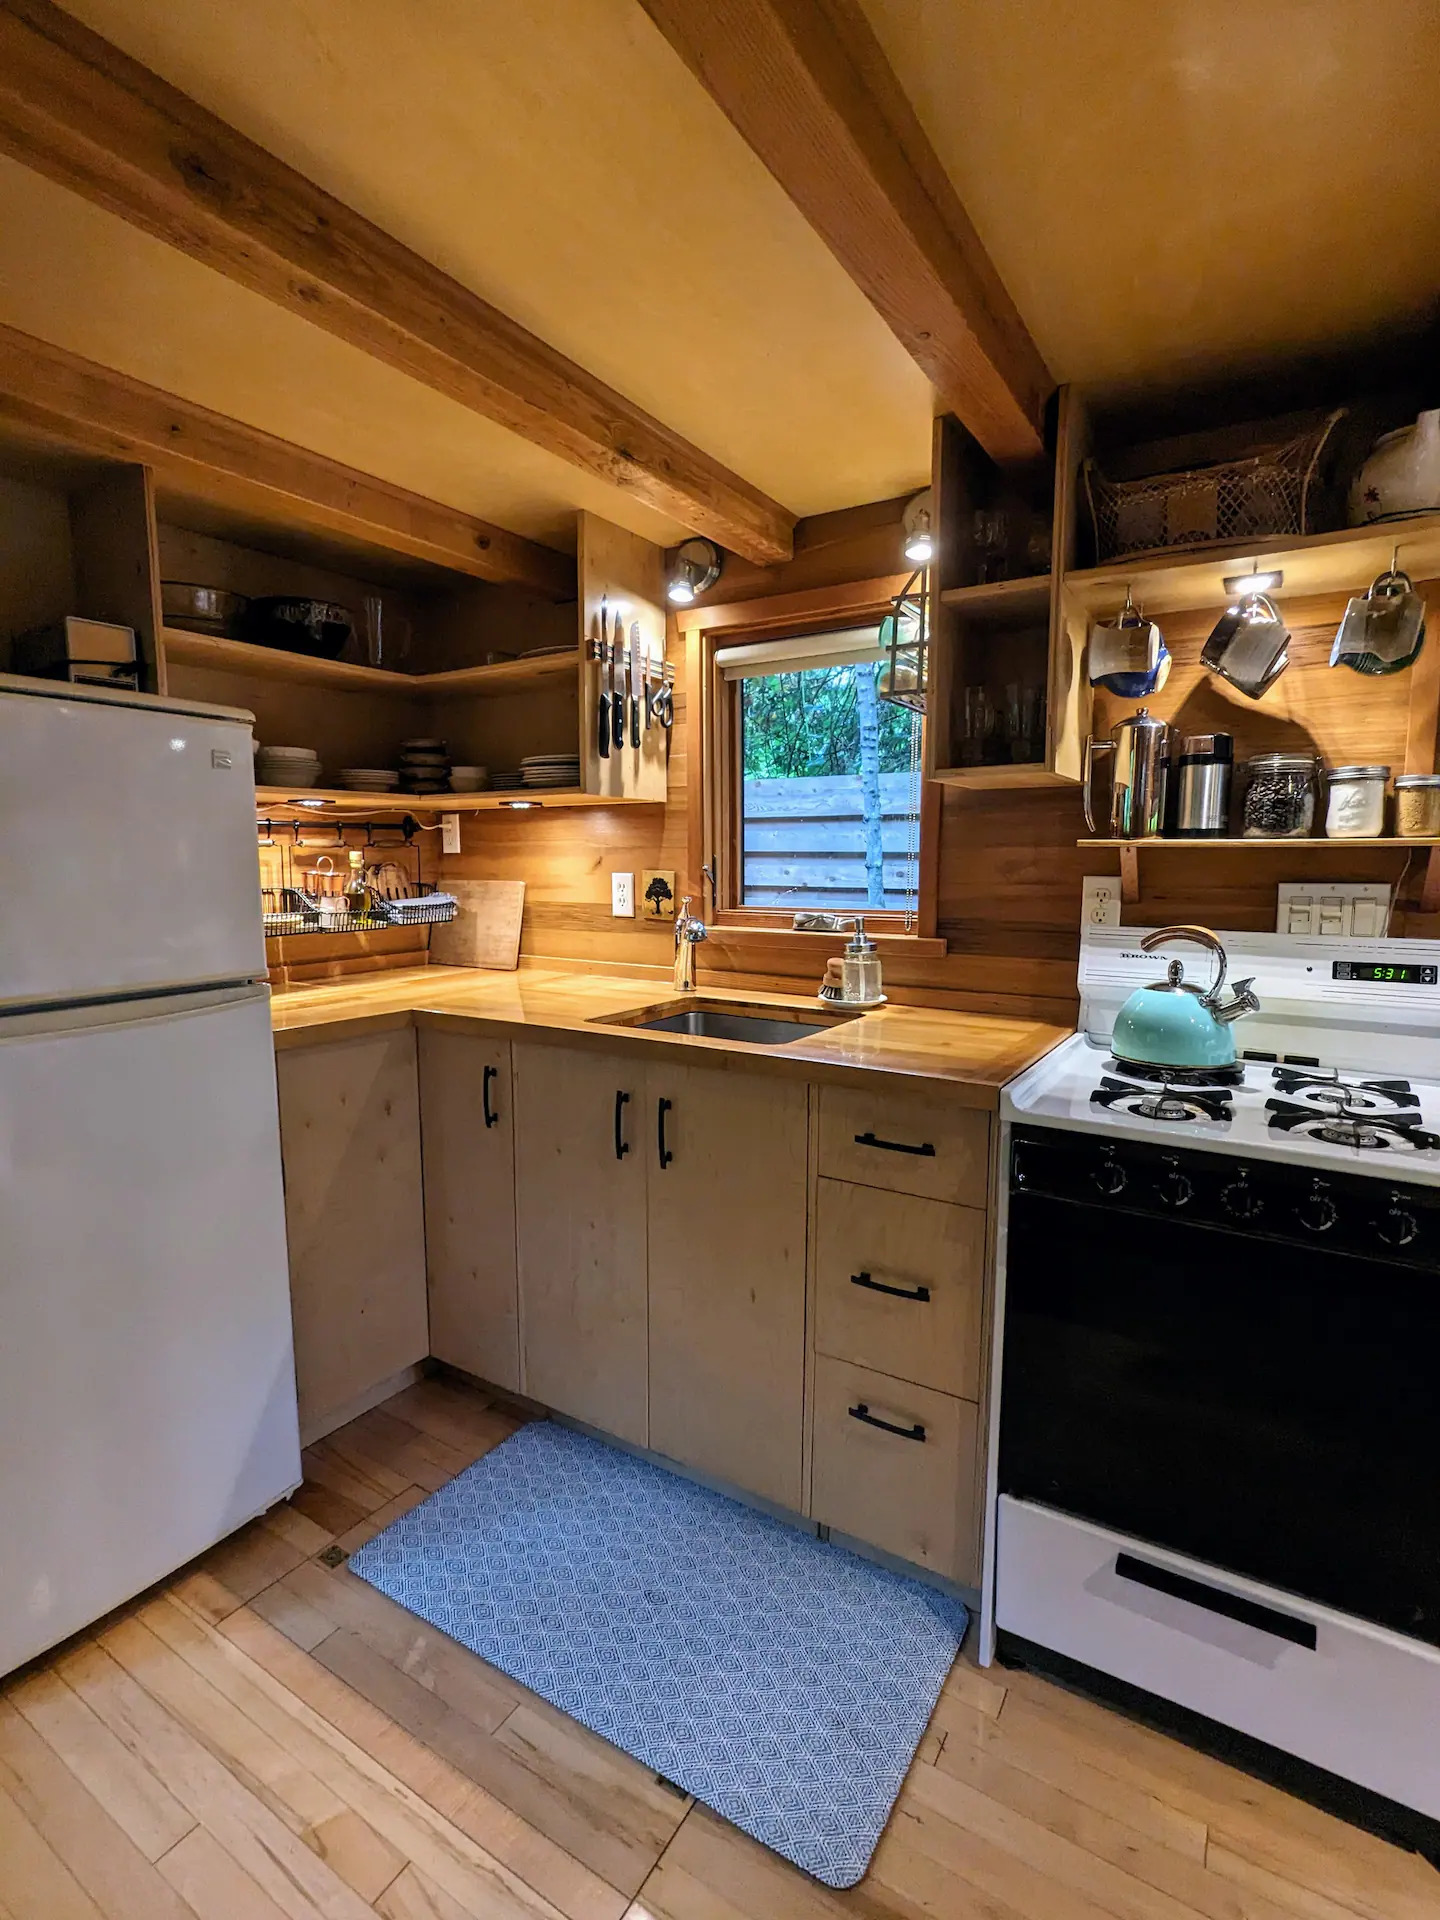 Kitchen, with a sink, fridge and oven